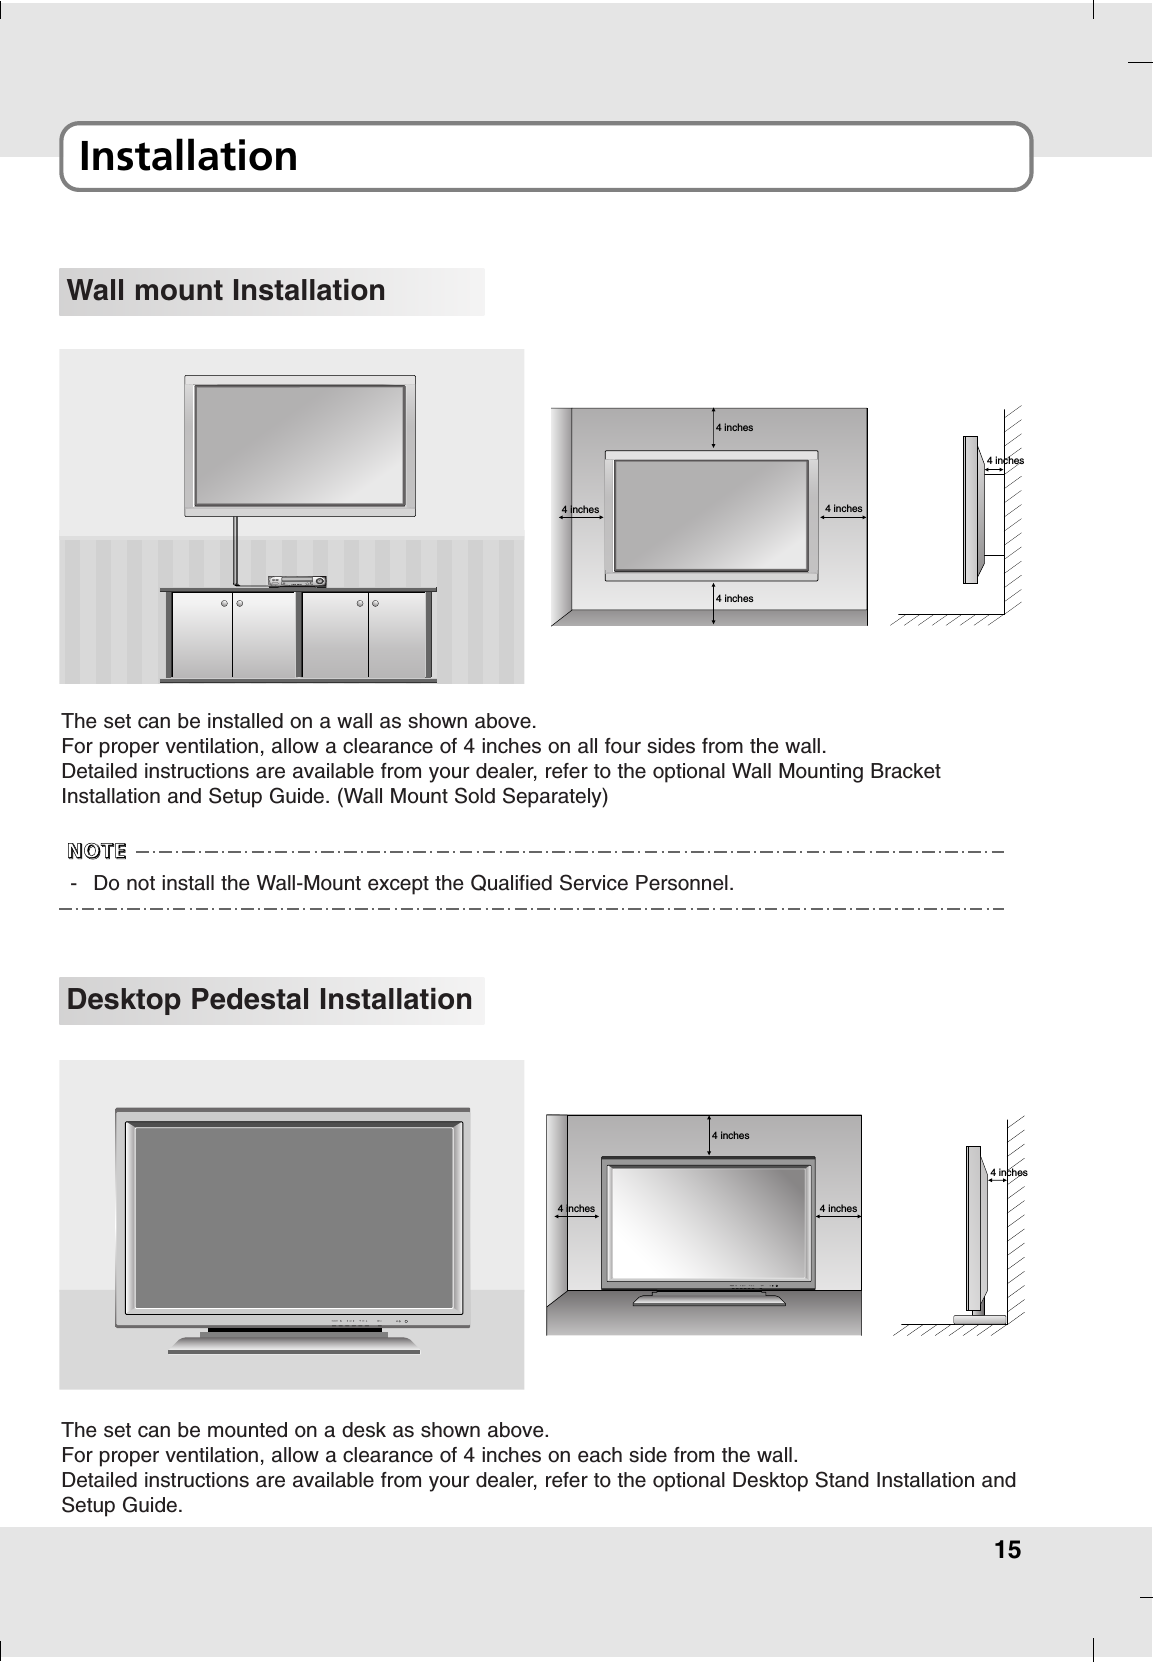 15Installation Wall mount Installation4 inches4 inches4 inches4 inches4 inchesThe set can be installed on a wall as shown above.For proper ventilation, allow a clearance of 4 inches on all four sides from the wall.Detailed instructions are available from your dealer, refer to the optional Wall Mounting BracketInstallation and Setup Guide. (Wall Mount Sold Separately)Desktop Pedestal Installation4 inches4 inches4 inches4 inchesThe set can be mounted on a desk as shown above.For proper ventilation, allow a clearance of 4 inches on each side from the wall.Detailed instructions are available from your dealer, refer to the optional Desktop Stand Installation andSetup Guide.-Do not install the Wall-Mount except the Qualified Service Personnel. NNNNOOOOTTTTEEEE